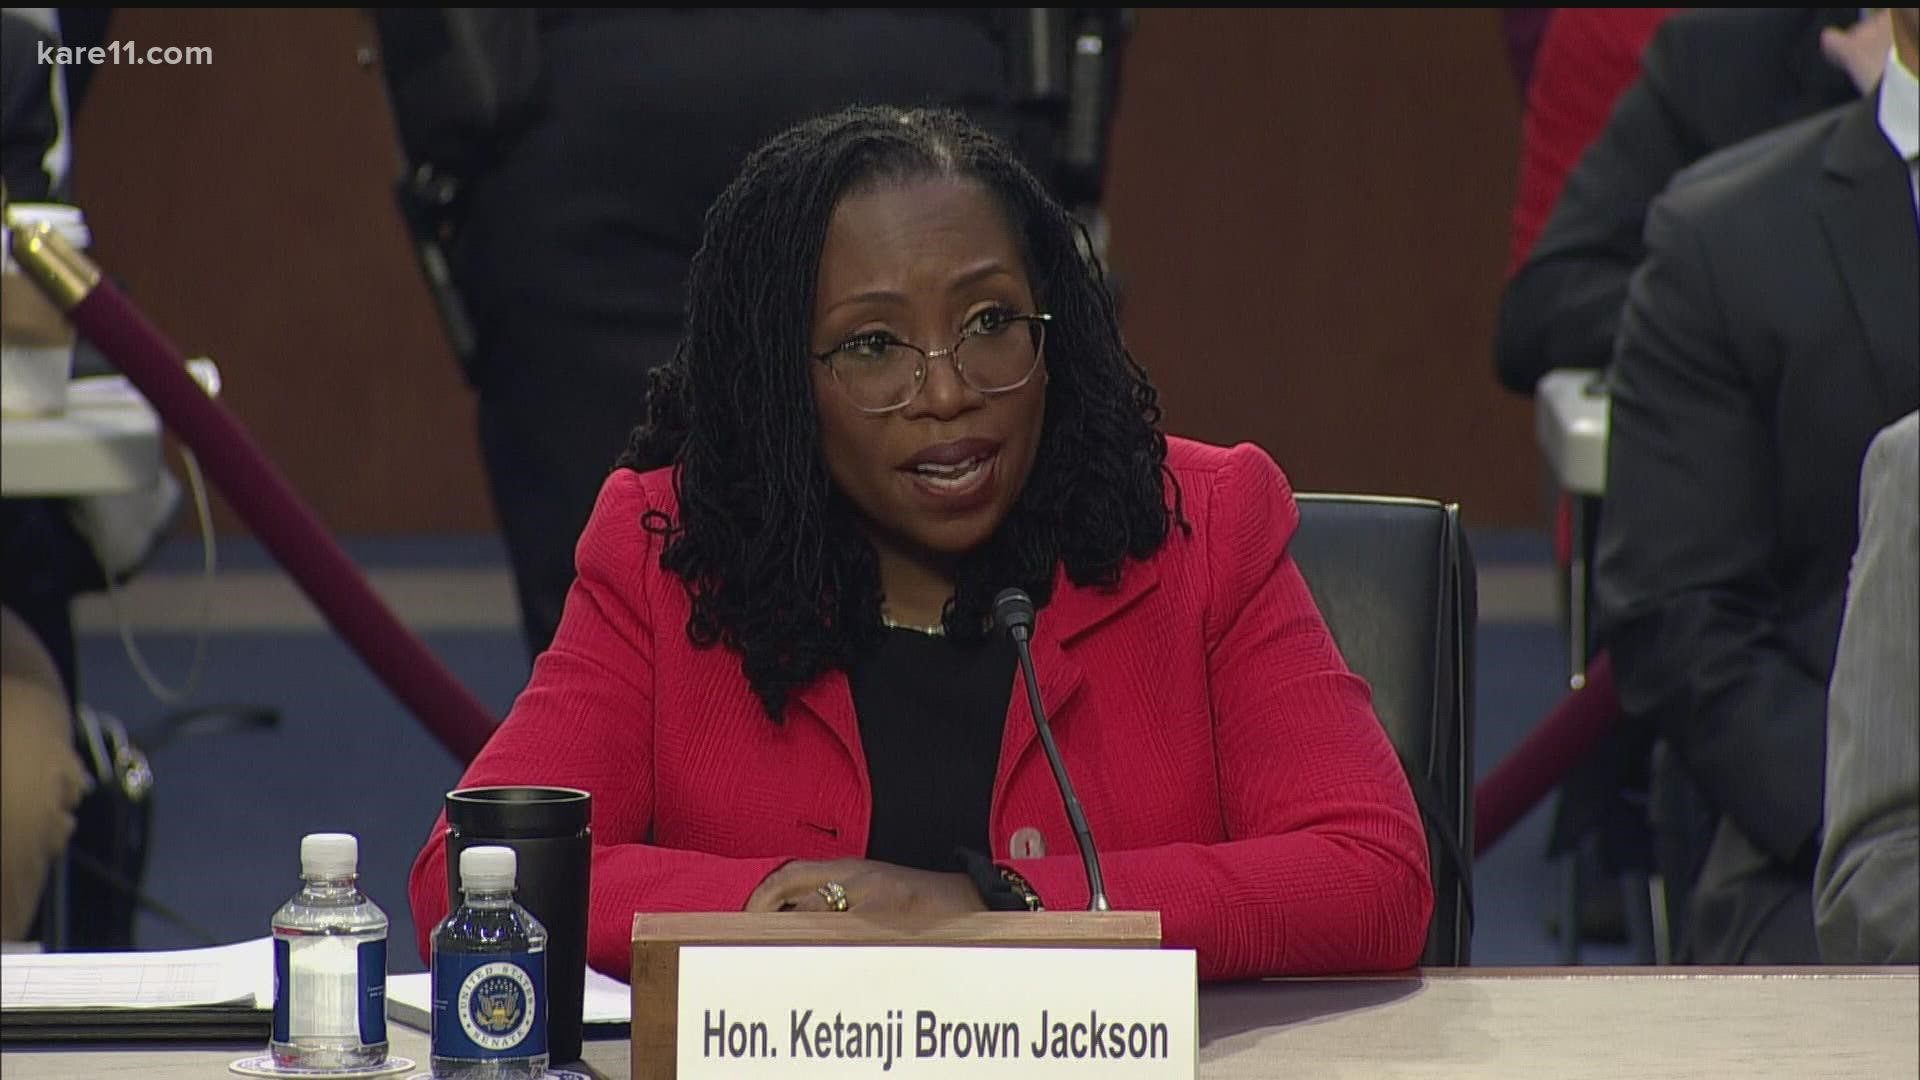 Judge Ketanji Brown Jackson's Supreme Court confirmation hearing continued Tuesday, as she answered questions spanning from voting rights to her religious views.